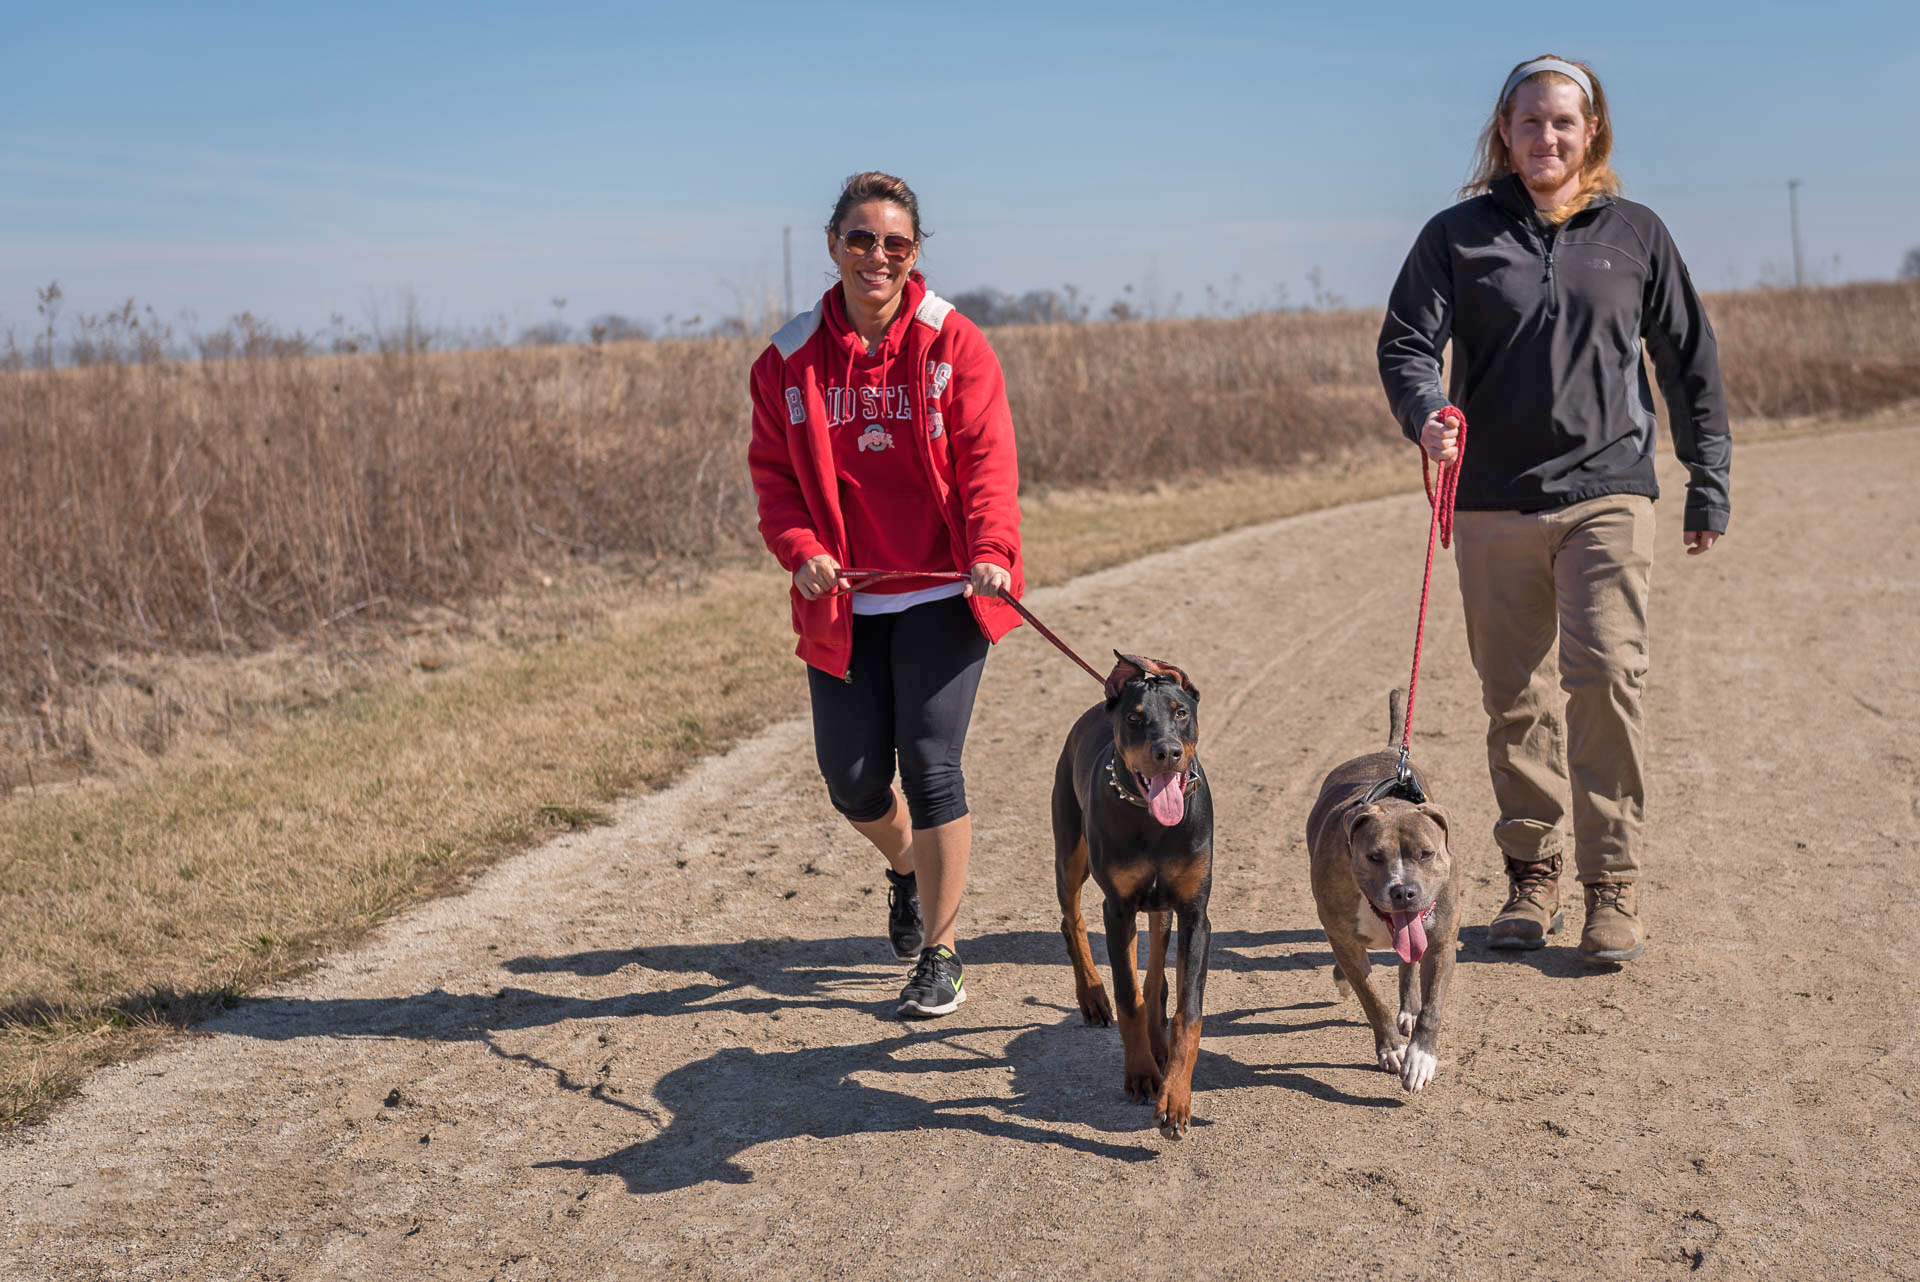 People walk their dogs on the Darby Creek Greenway Trail at Battelle Darby Creek. Photo by John Nixon.